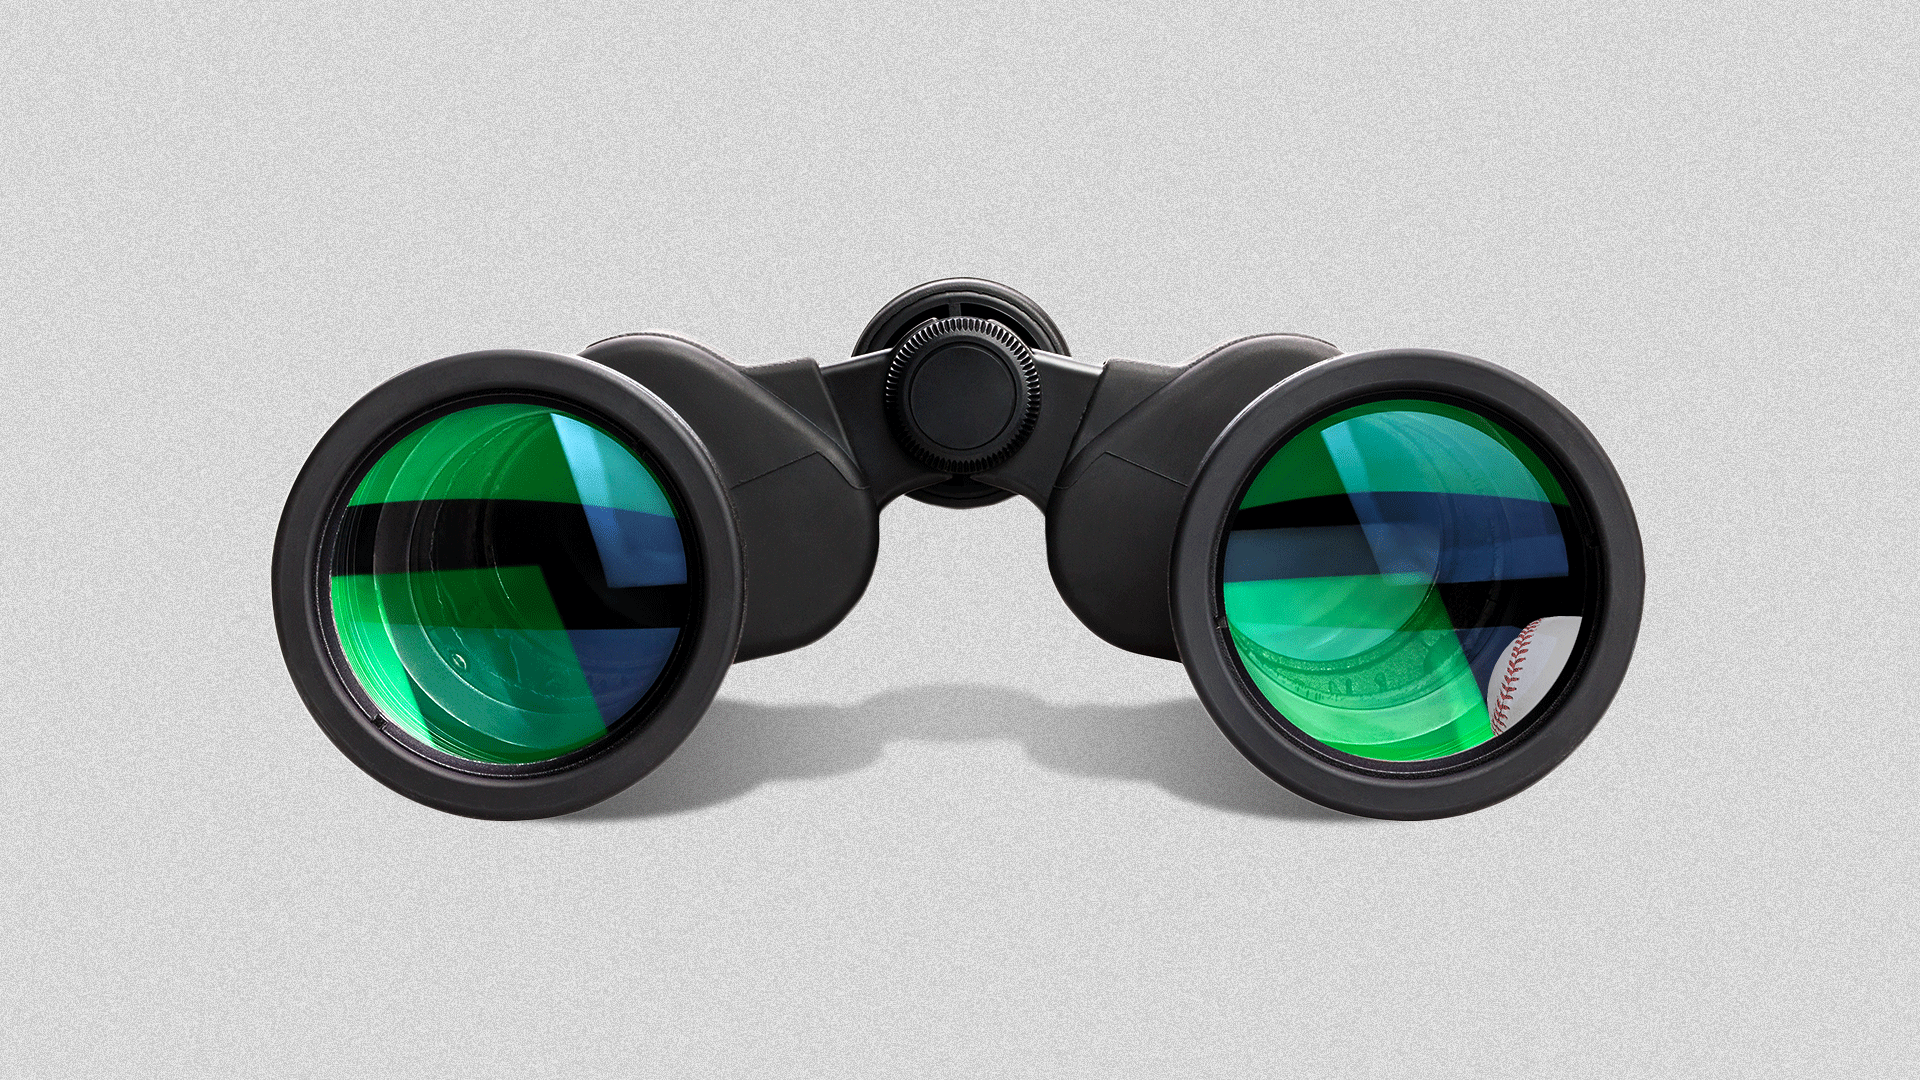 Animated illustration of a pair of binoculars with a reflection of a baseball being thrown in the lenses